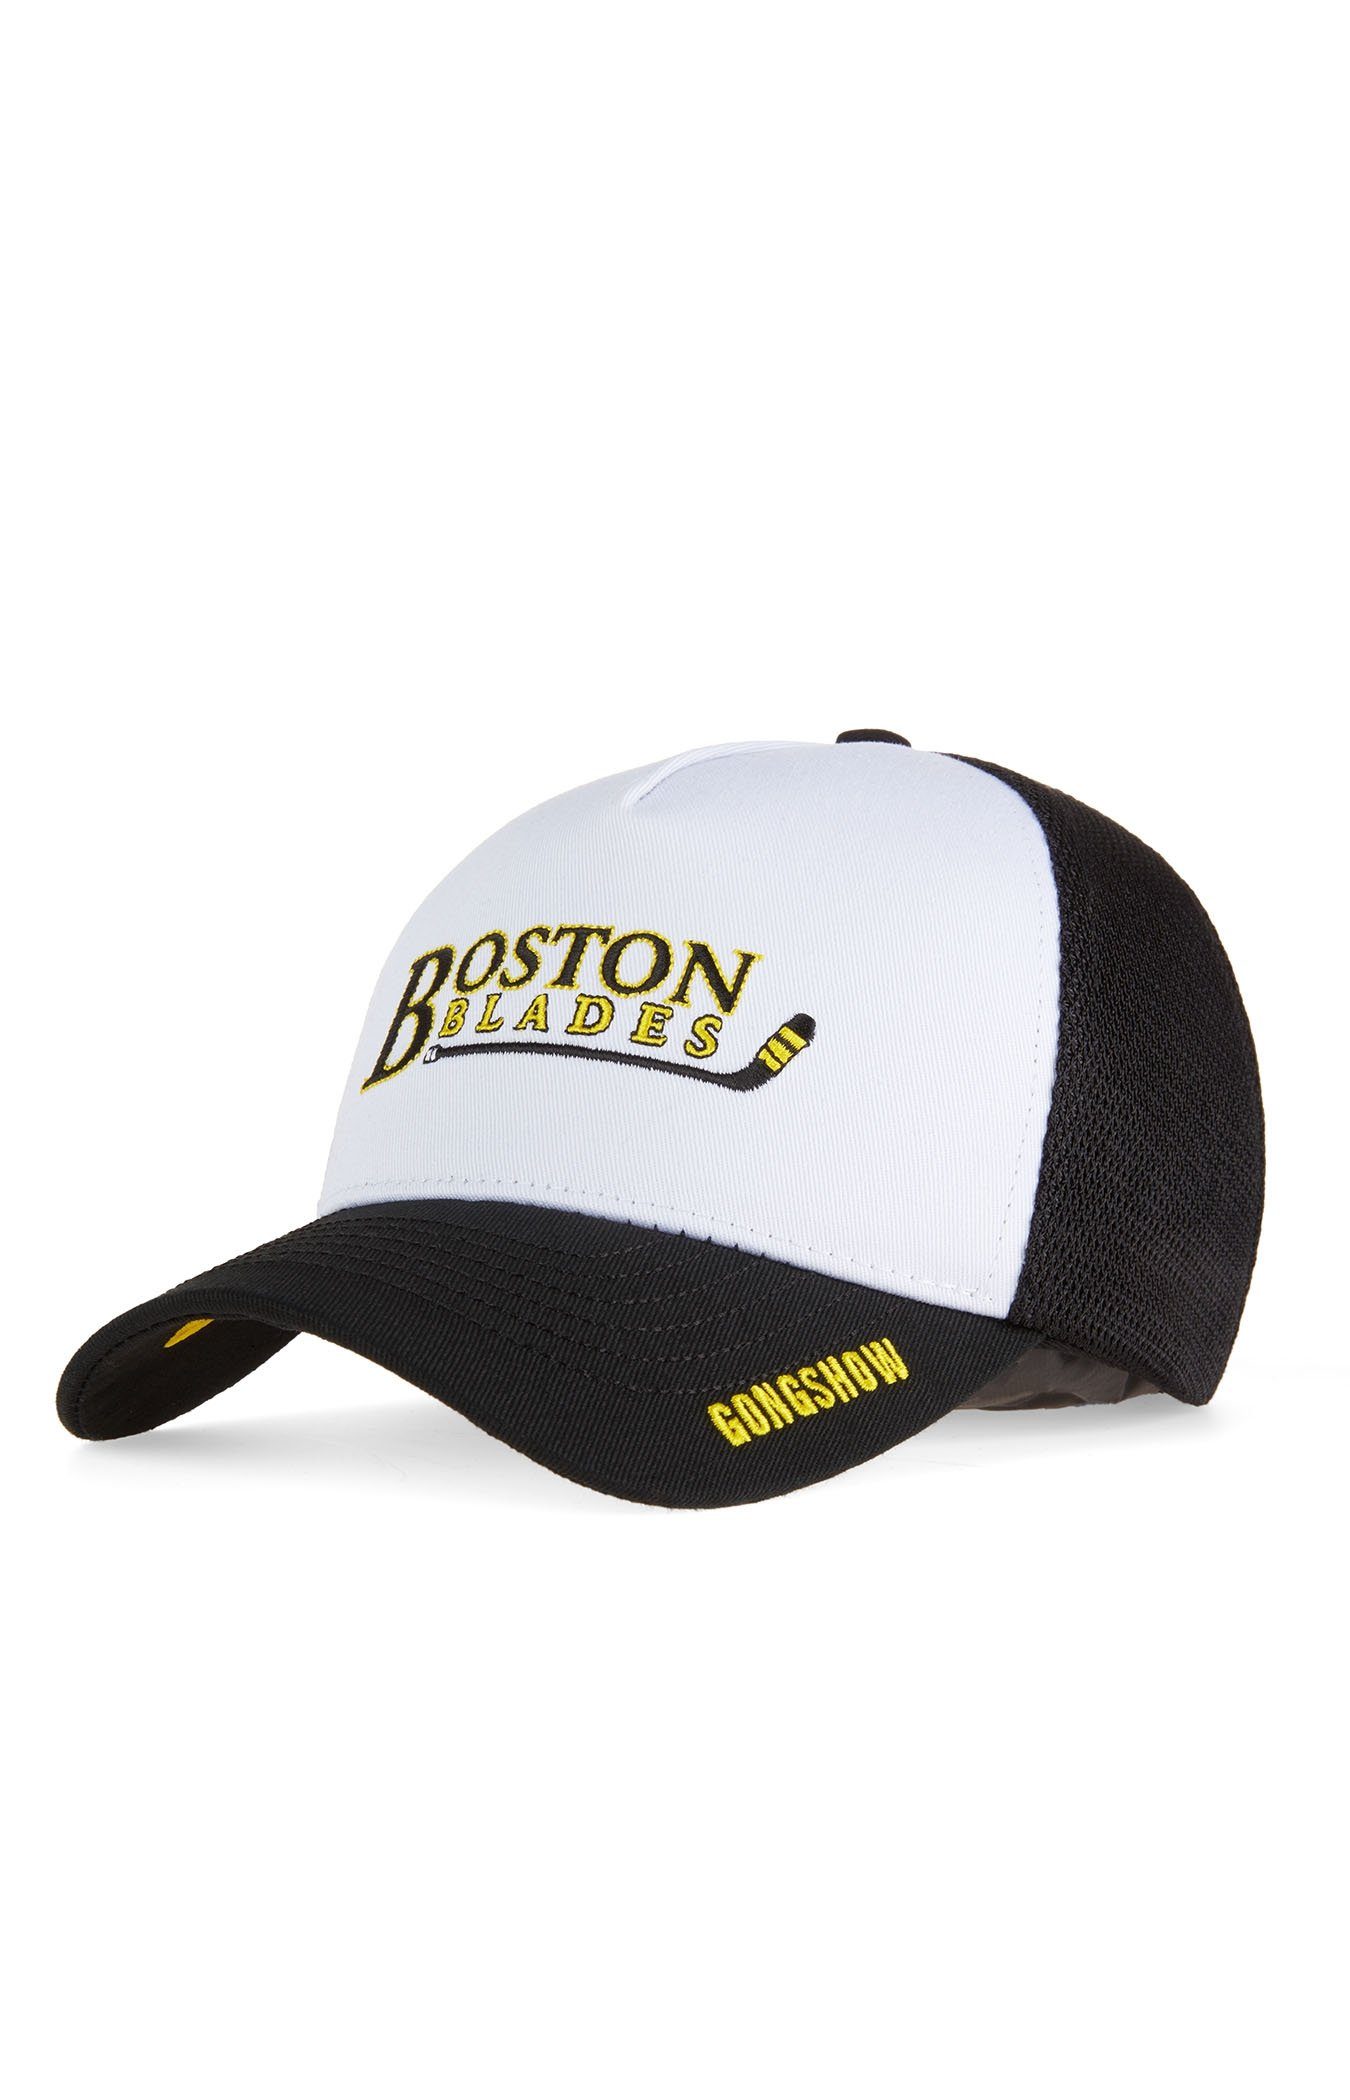 Gongshow Official CWHL Boston Blades Womens Hockey Hat – GONGSHOW USA